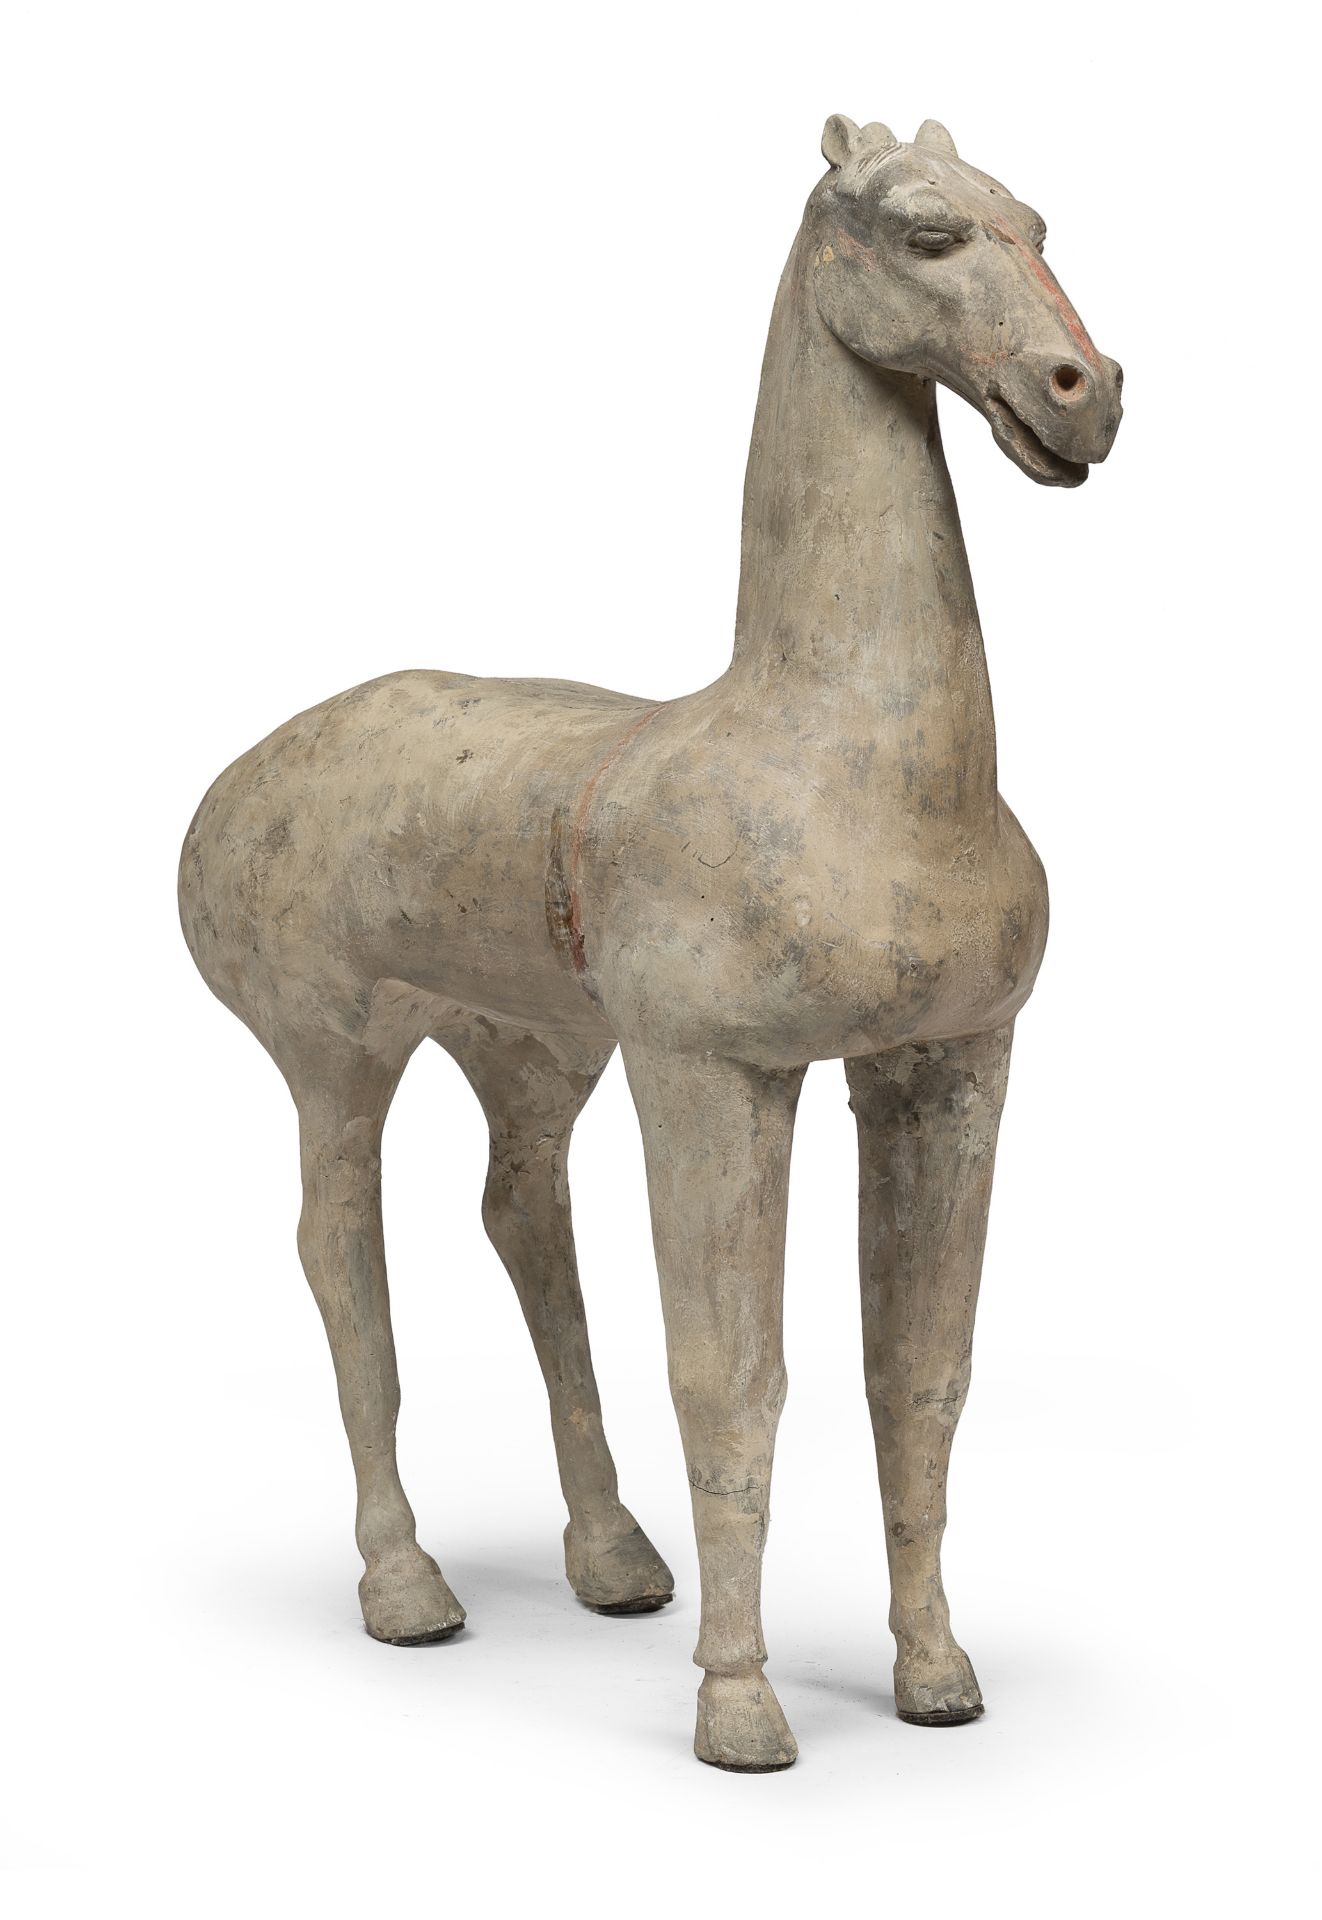 A POLYCHROME-PAINTED TERRACOTTA FIGURE OF HORSE CHINA HAN DYNASTY (202 B.C. - 220 A.C.)